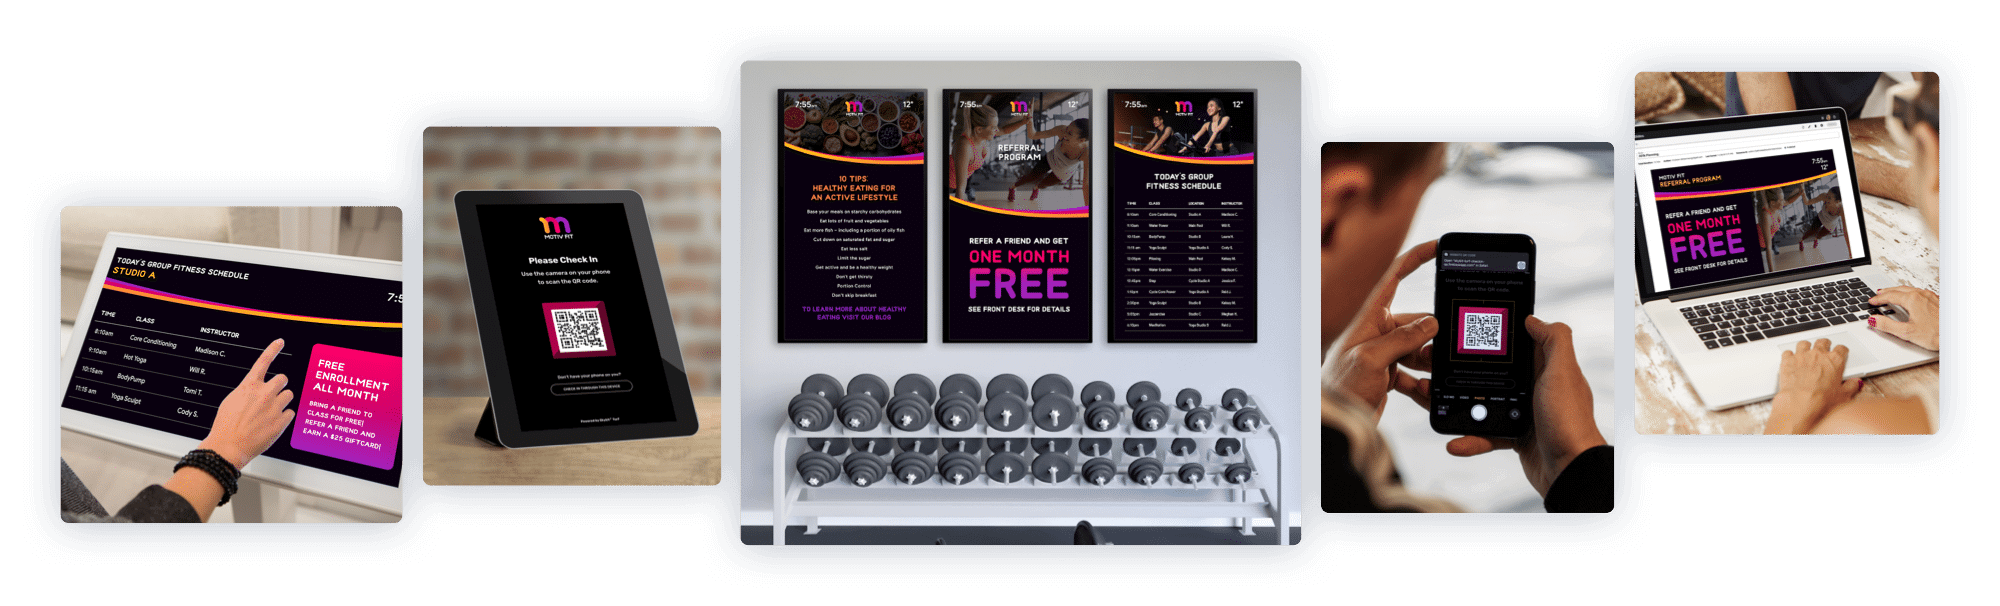 Skykit Beam Digital Signage Content Management Solution for Gyms and Fitness